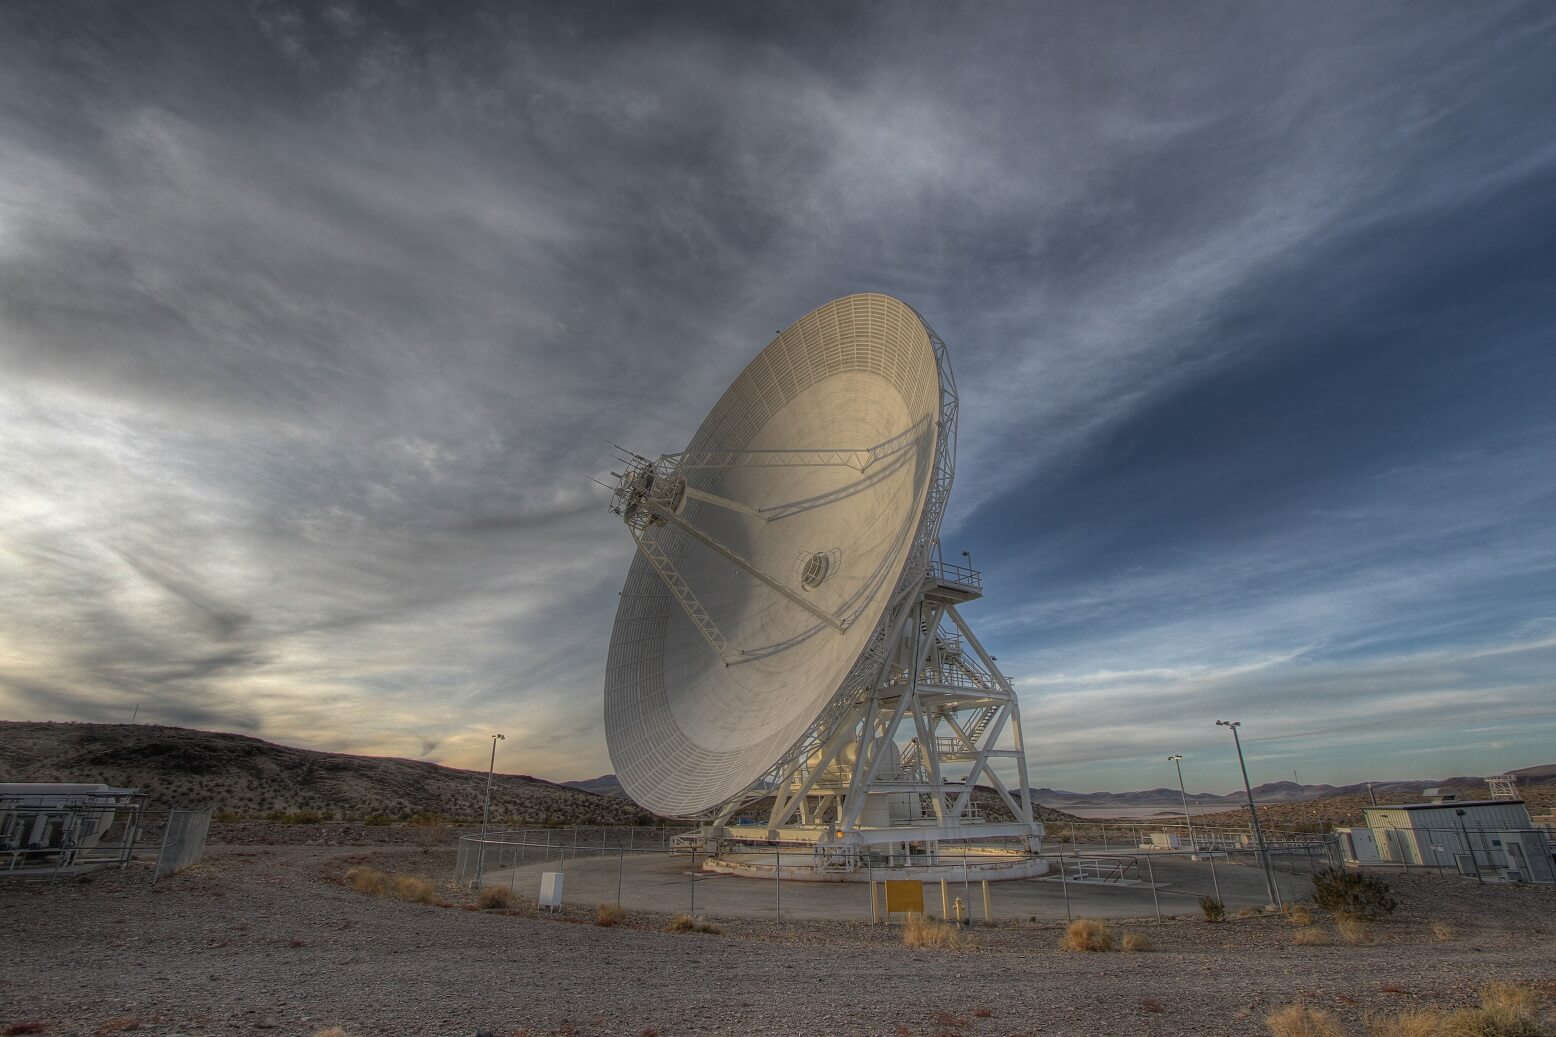 The 34-meter diameter radio telescope at NASA's Global Space Network's Goldstone Center in Florida tracks a spacecraft as it comes into its line of sight. Photo: JPL